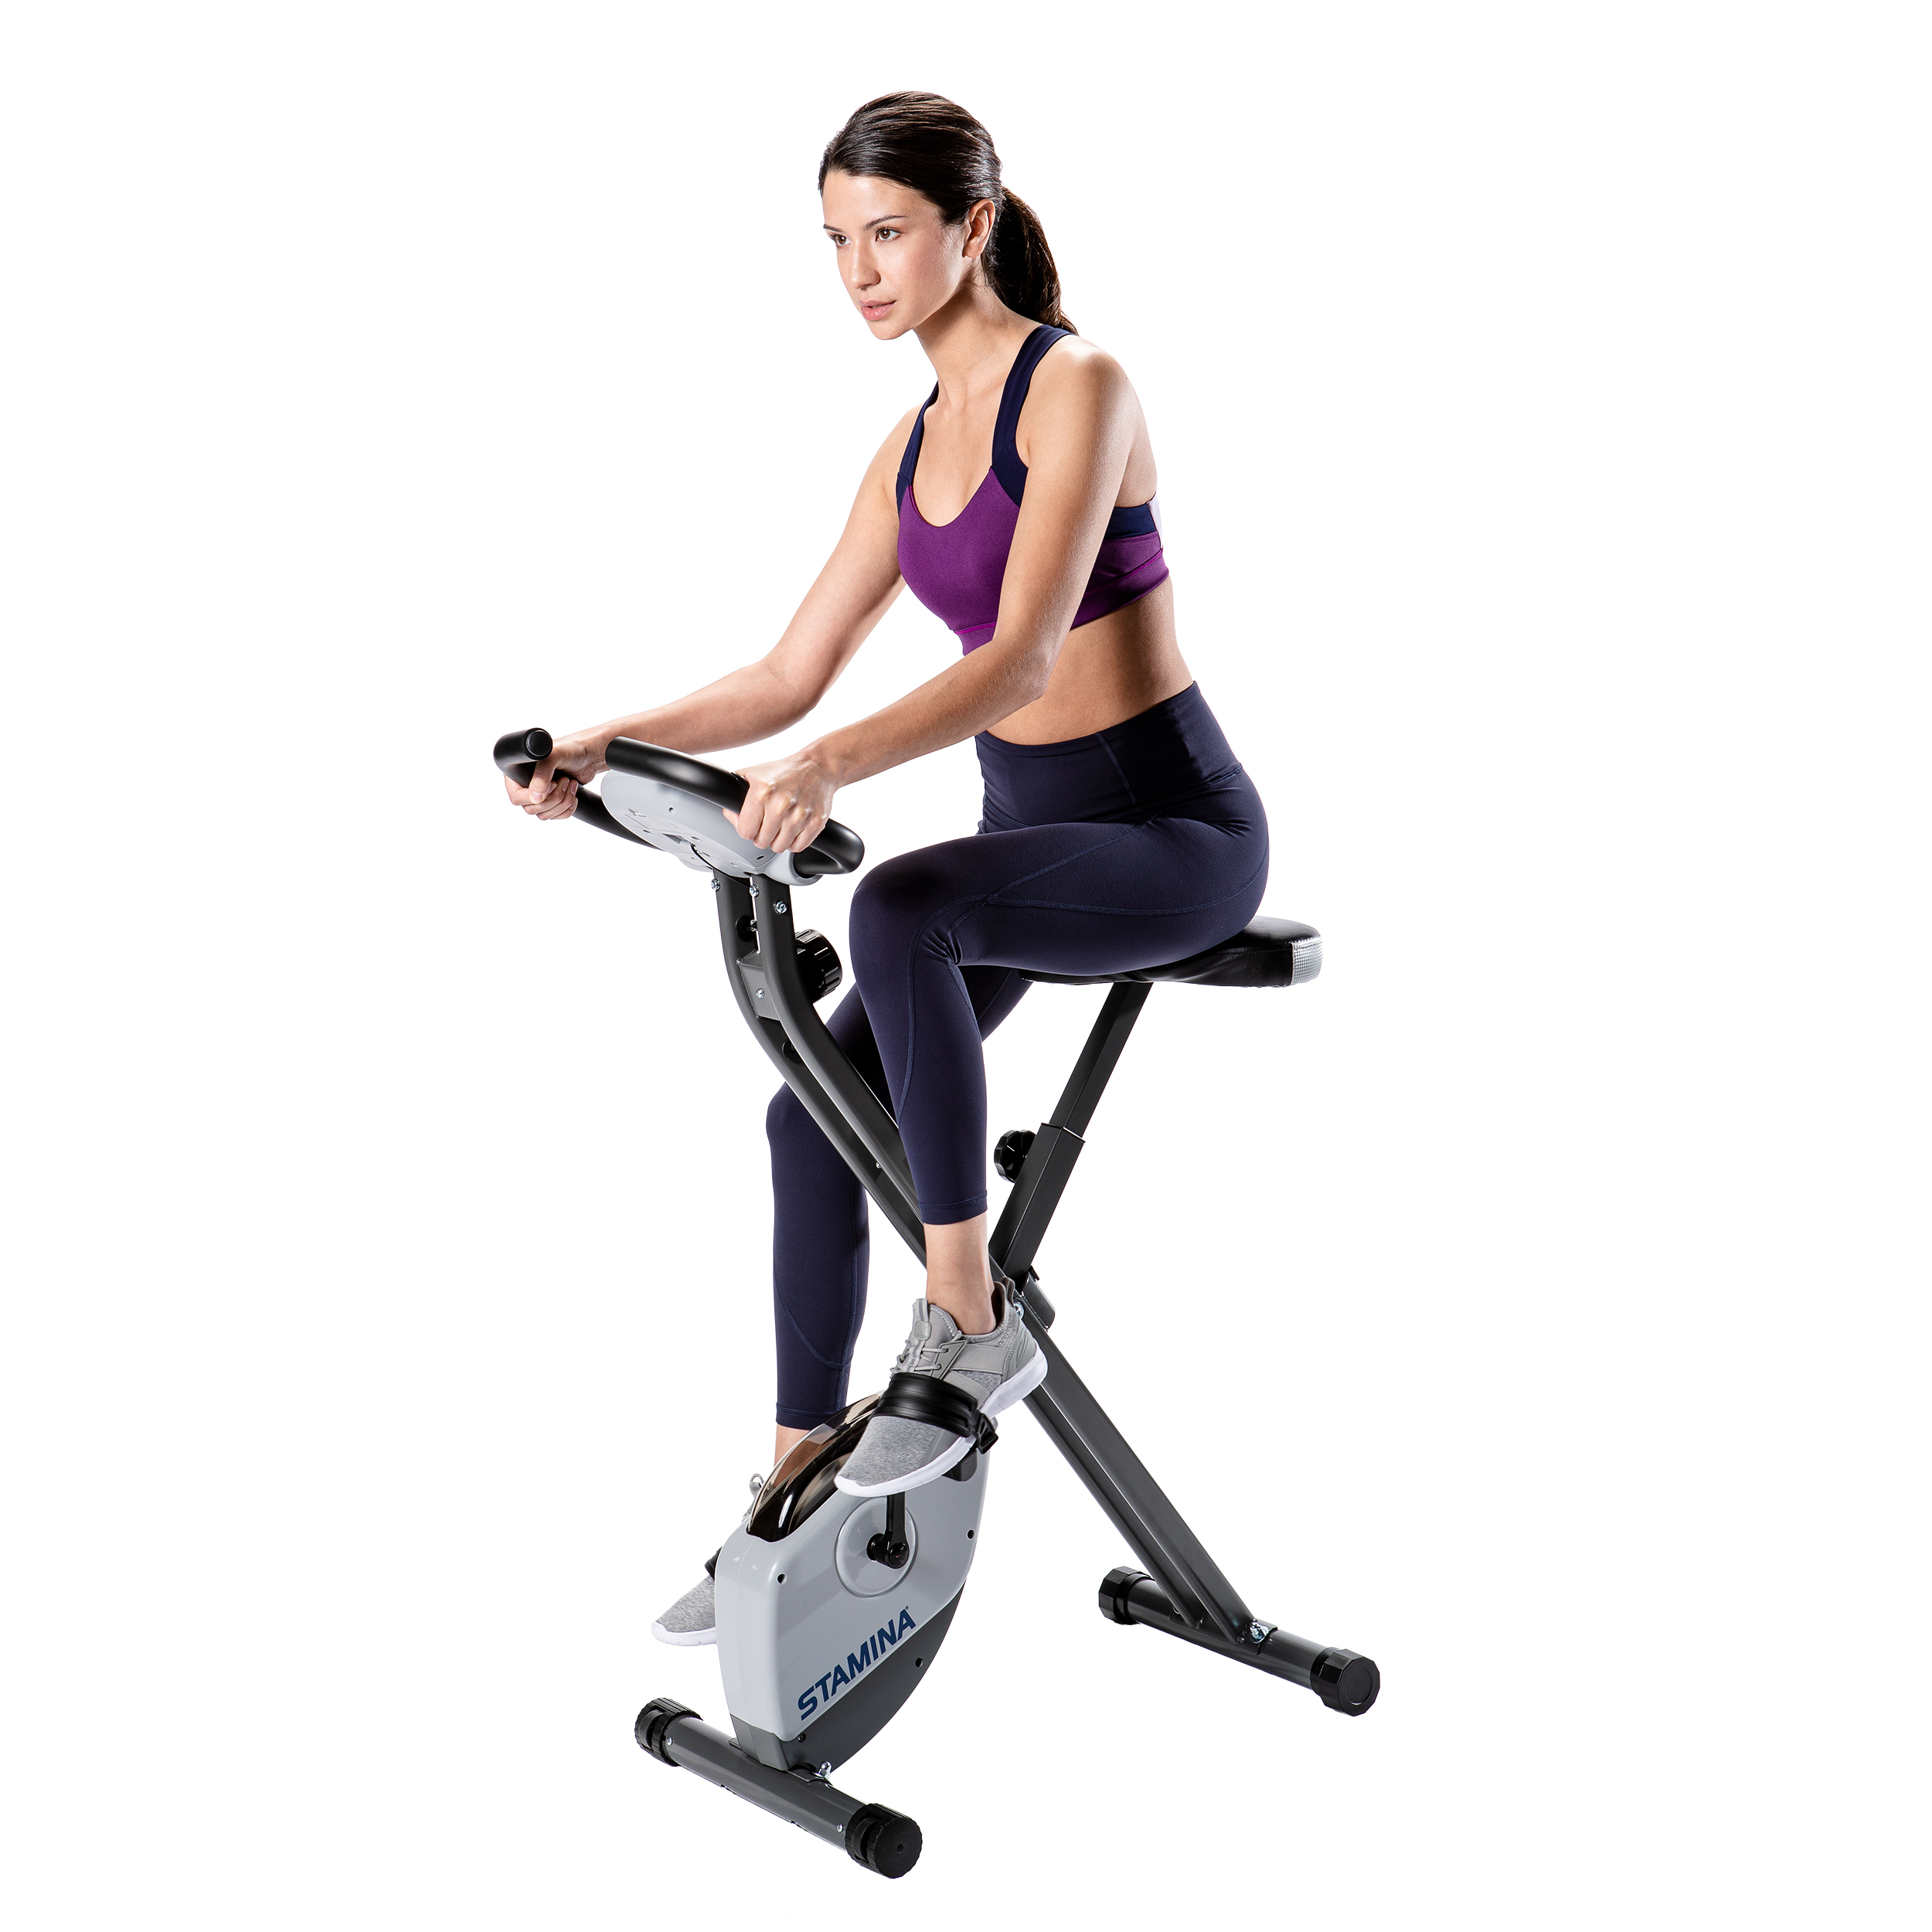 Stamina Folding Cardio Upright Exercise Bike with Heart Rate Sensors and Extra Wide Padded Seat - image 2 of 8